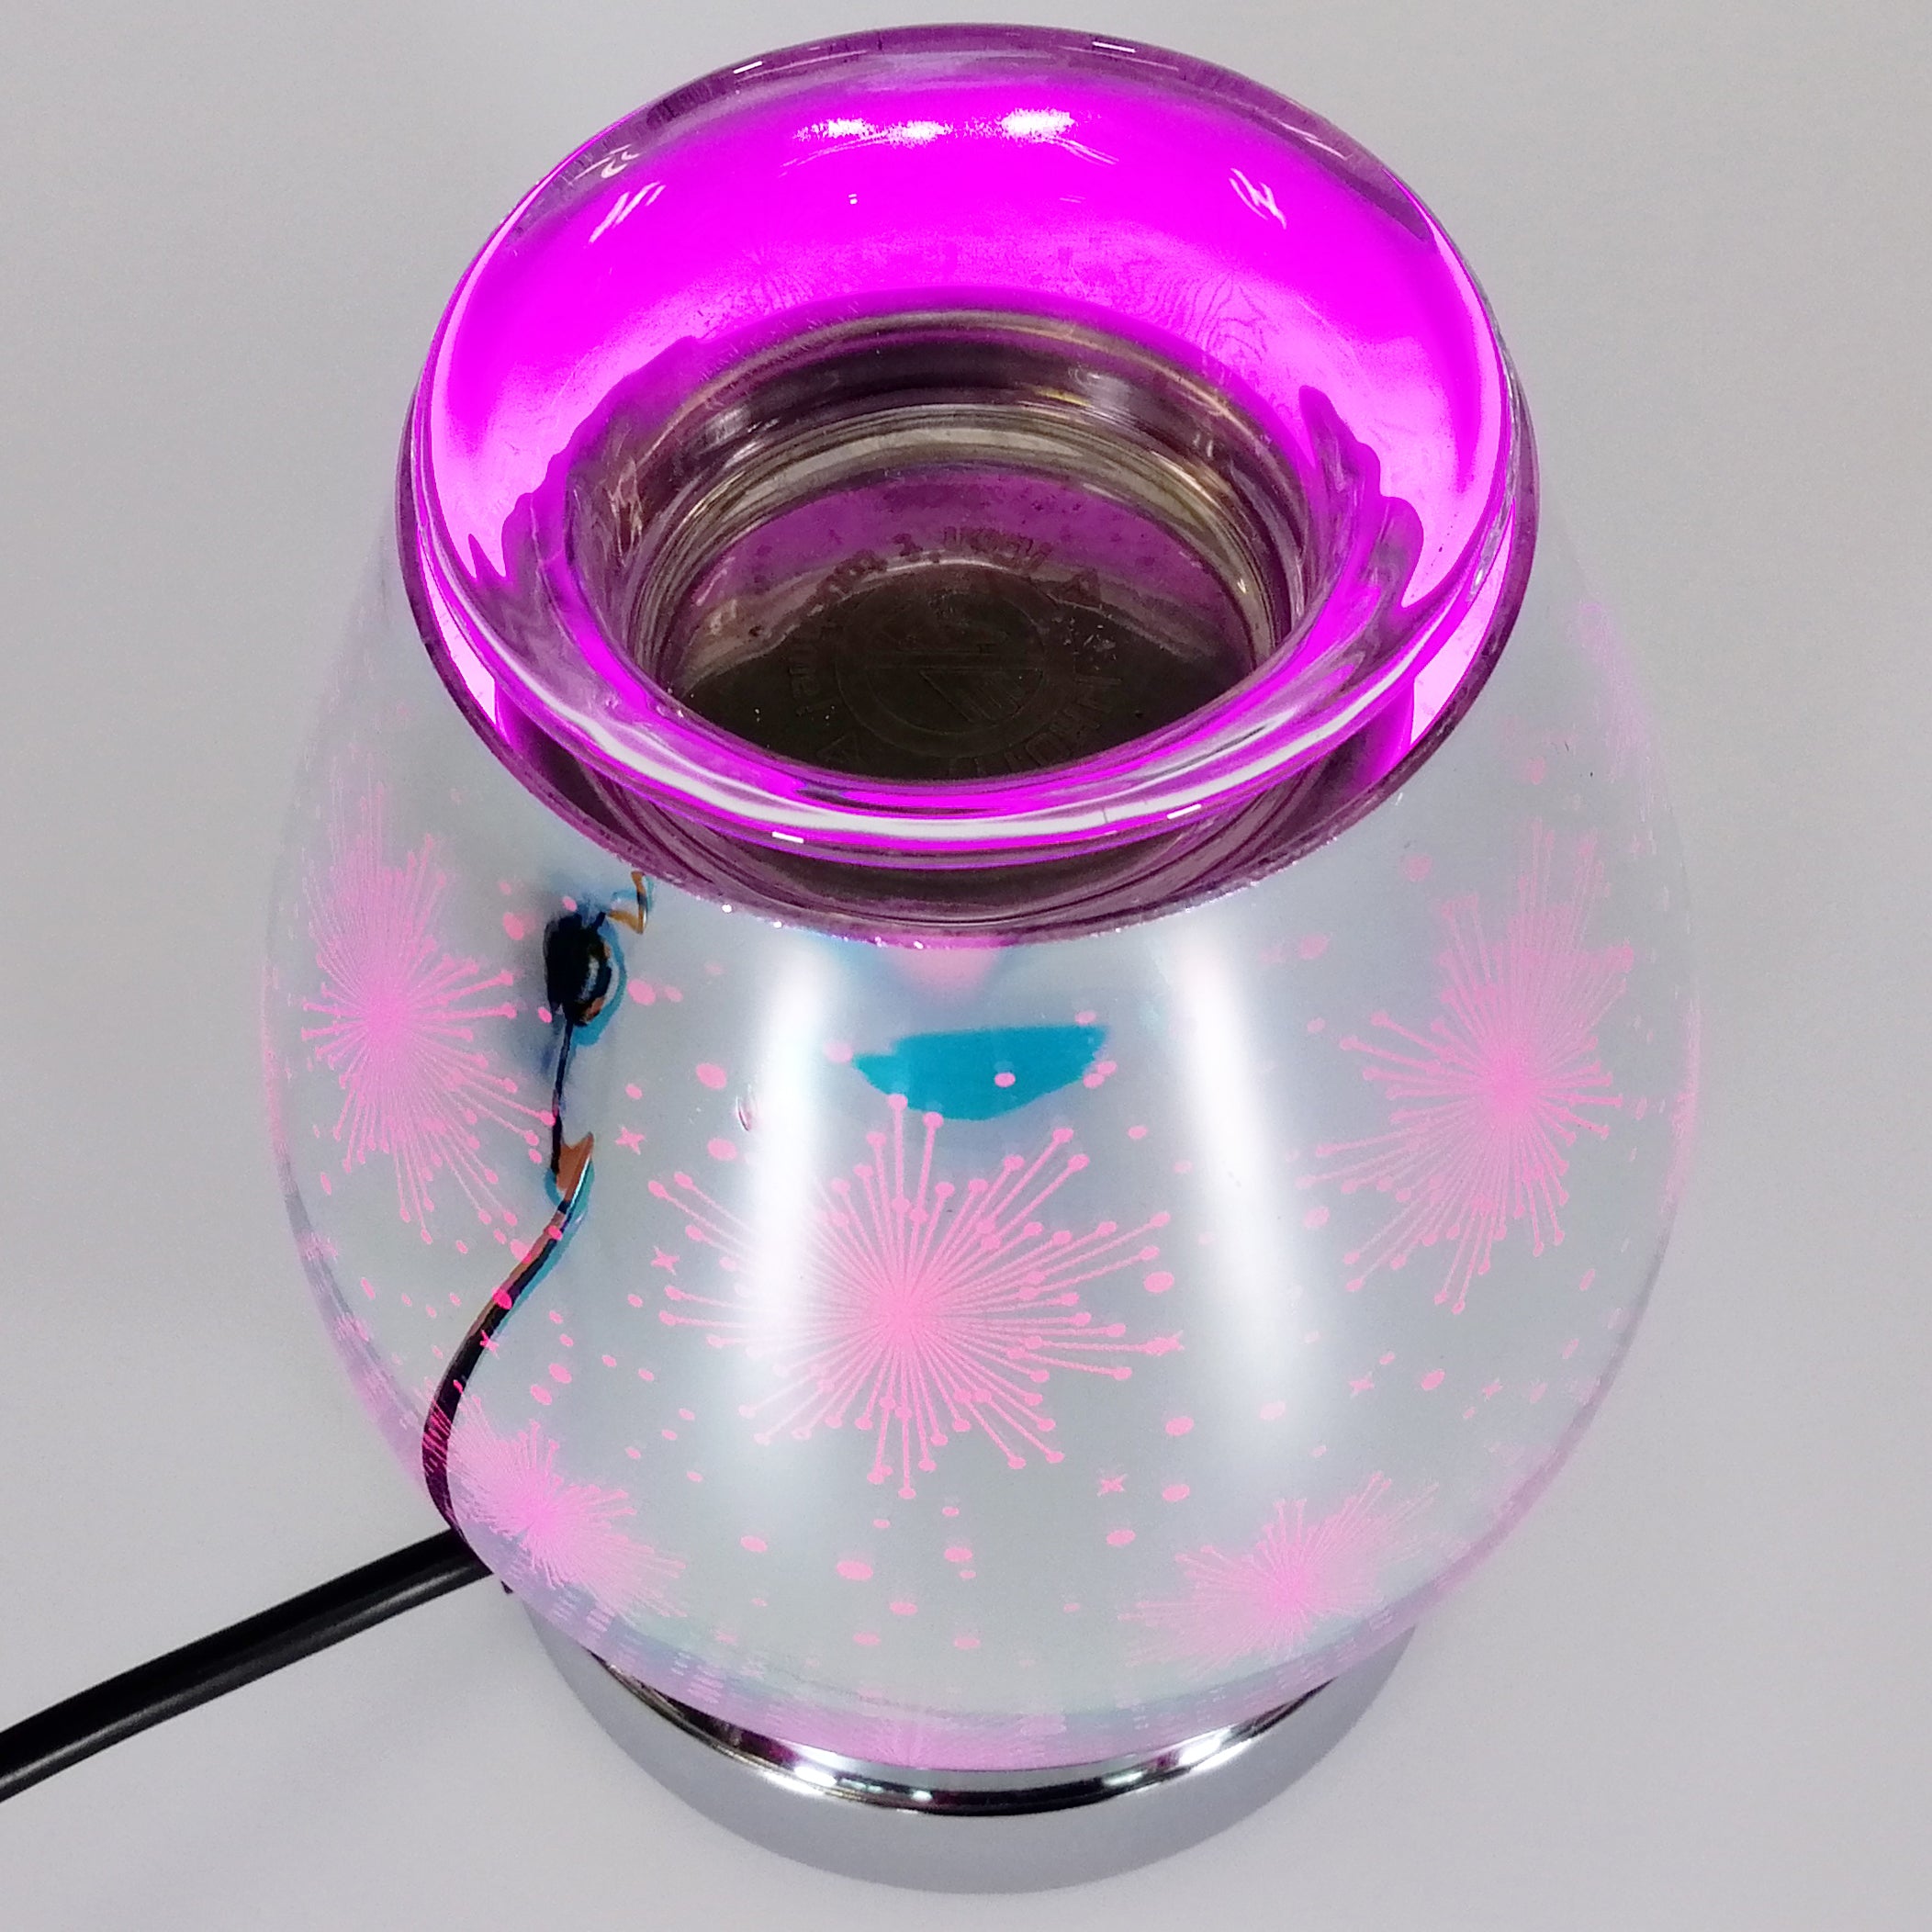 Scentchips Warmer with LED 'Fireworks' Colour Changing Display